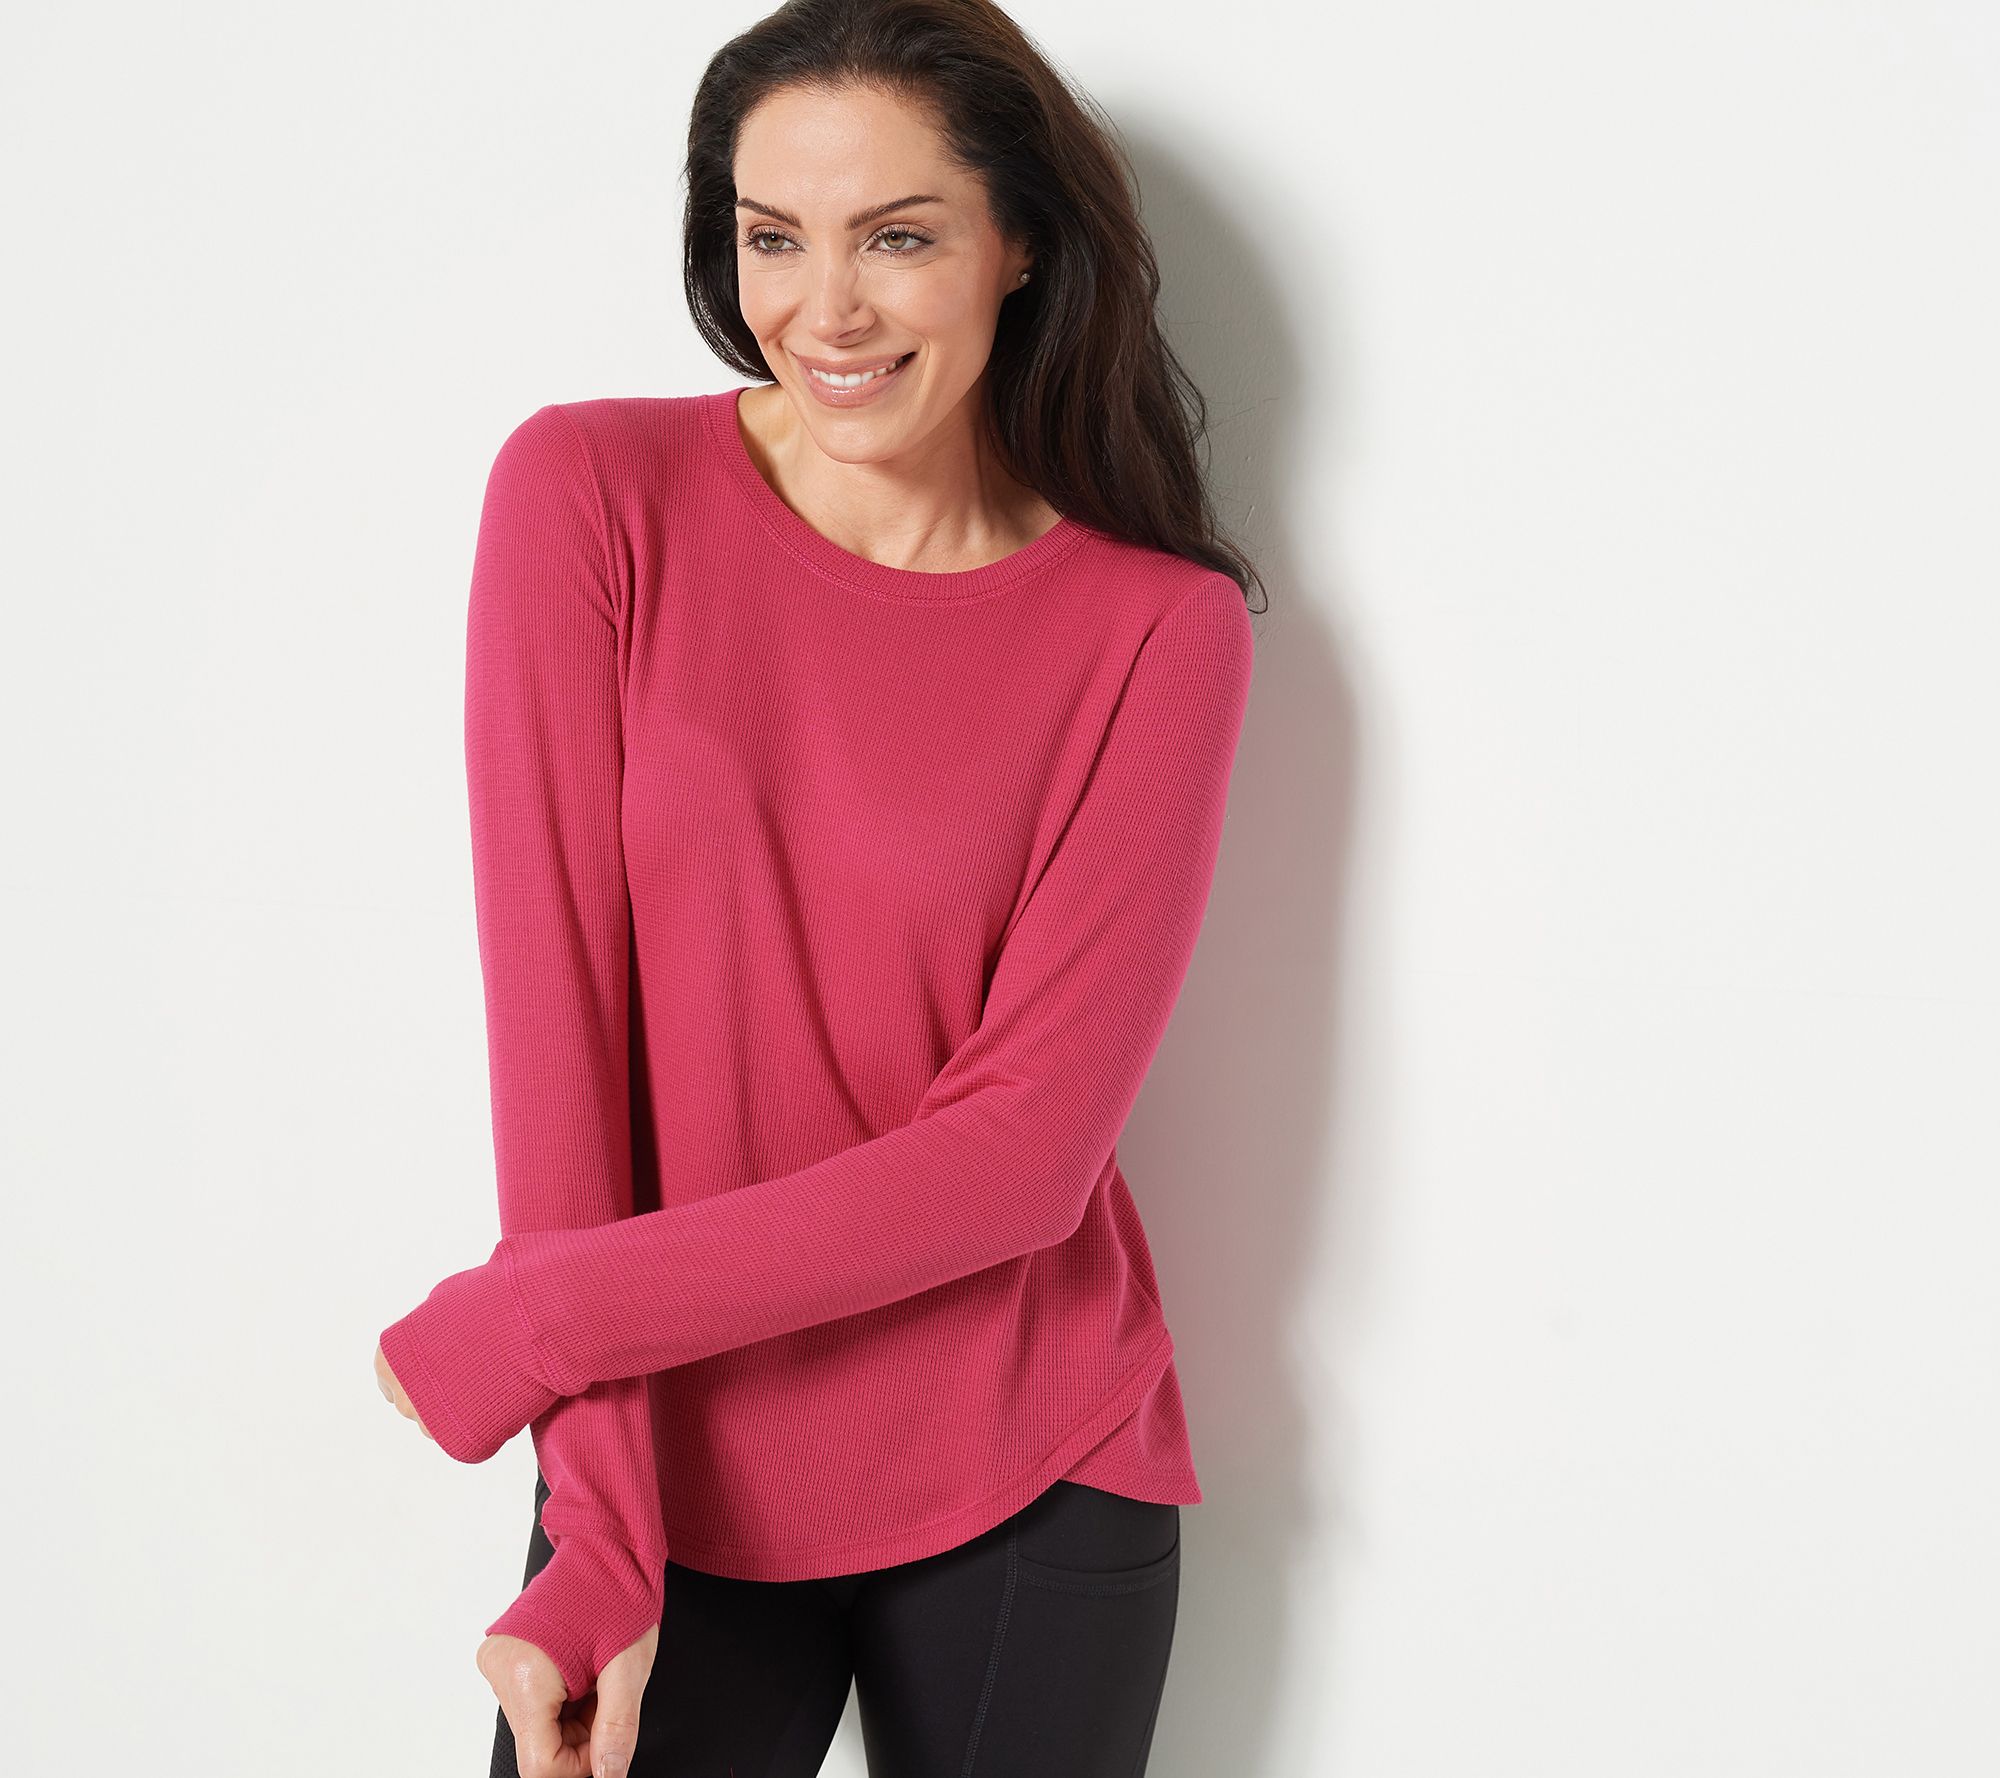 Susan Graver SG Sport Thermal Knit Top with Thumbhole Detail